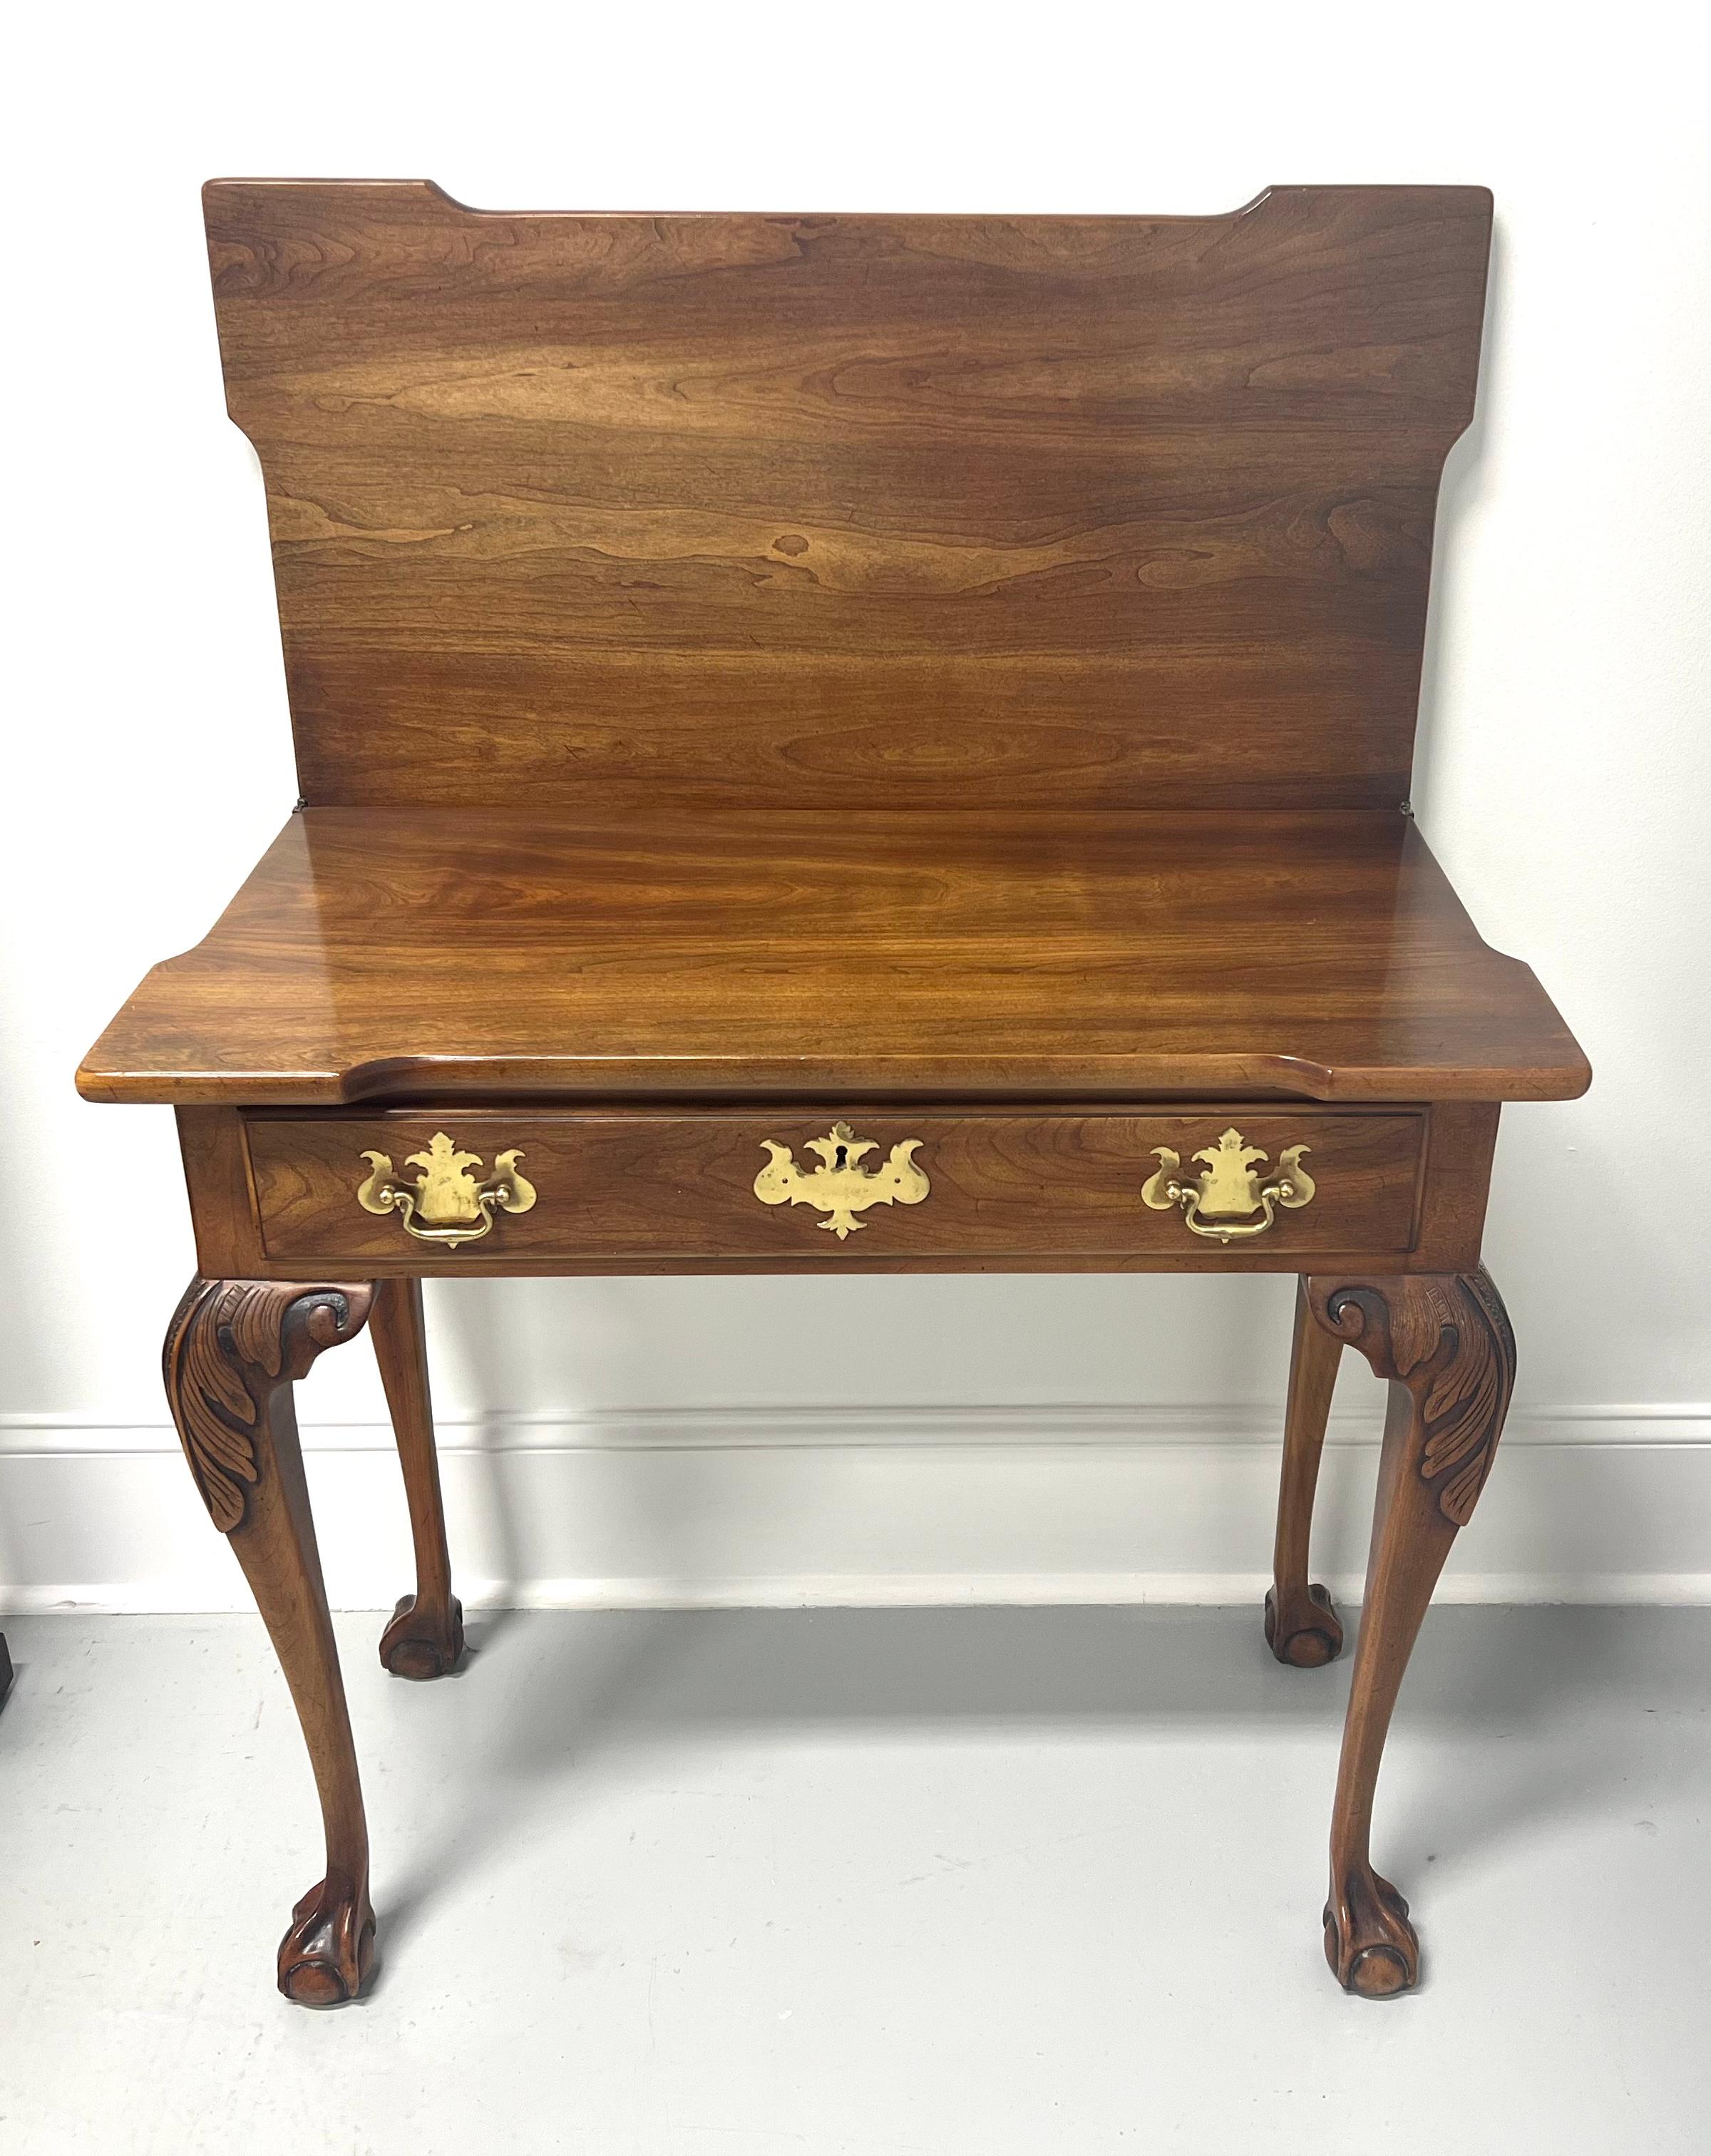 A Chippendale style gateleg game /console table by Statton Furniture, from their Private Collection. Solid cherry wood with their Oxford finish, flip up top with squared corners, one pull out back gateleg, acanthus leaf carved knees, cabriole legs